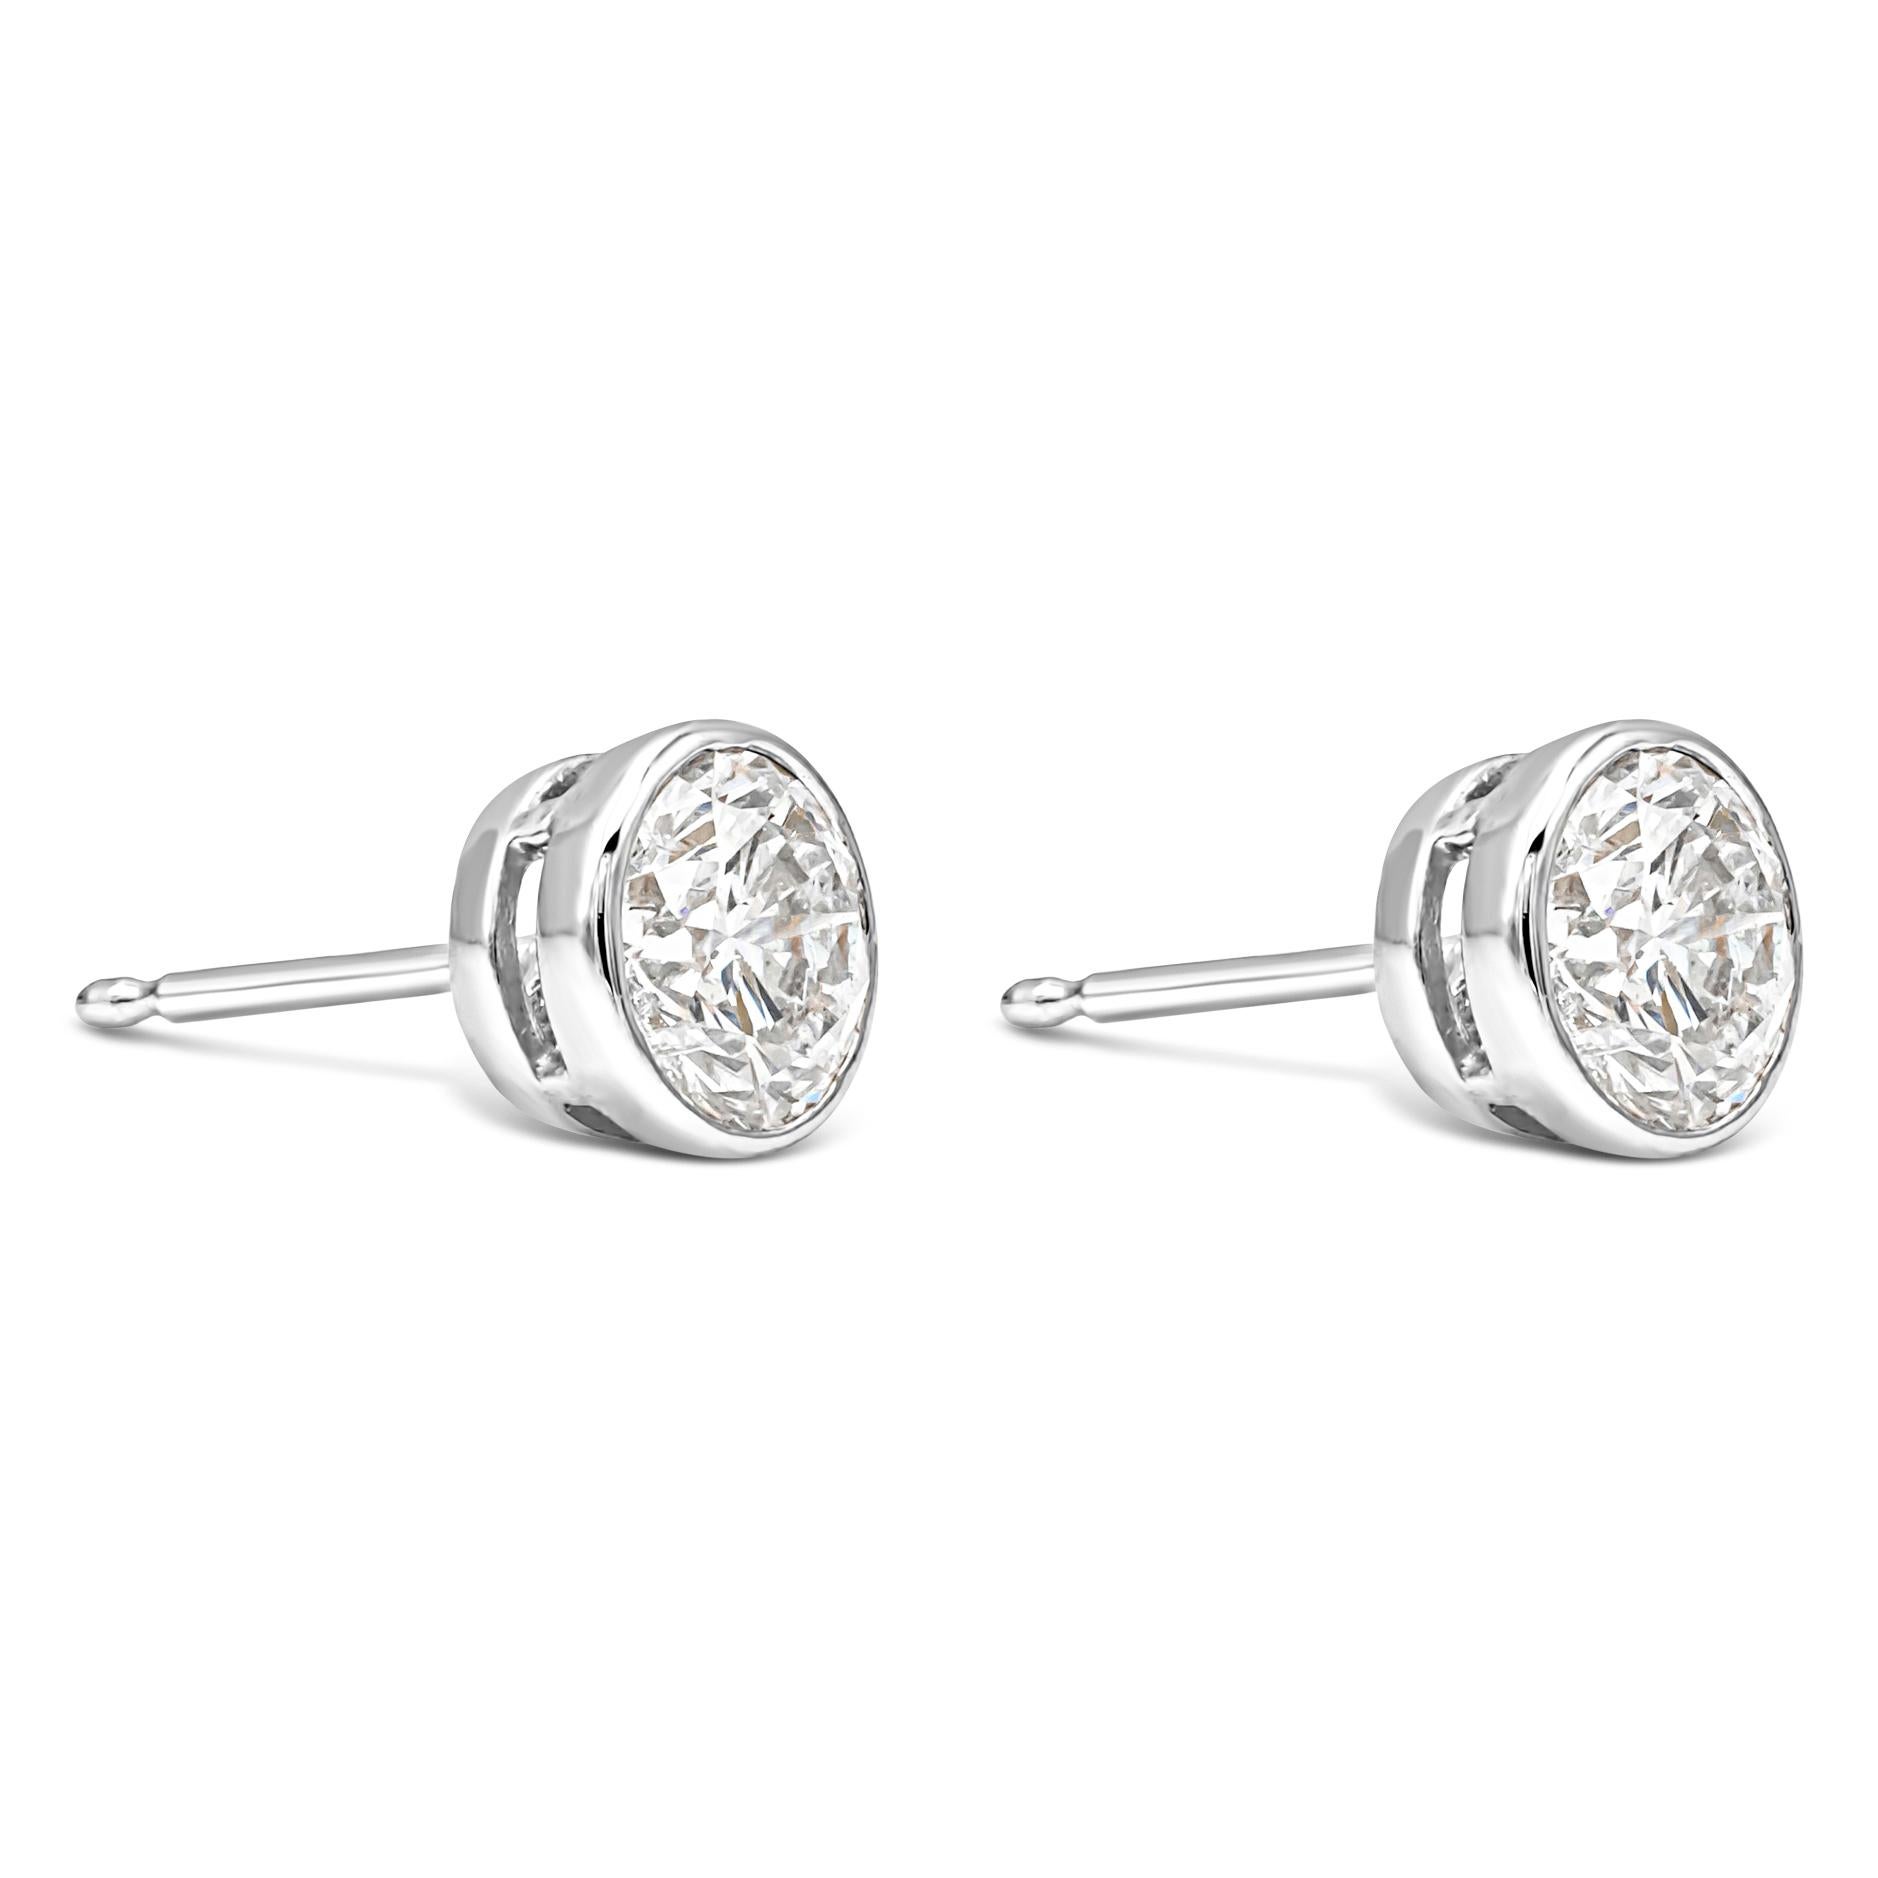 This classic stud earrings showcasing a brilliant round cut diamond bezel set in a 14k white gold mounting weighing 1.44 carats total, E color and SI3 in clarity. 

Style available in different price ranges. Prices are based on your selection.